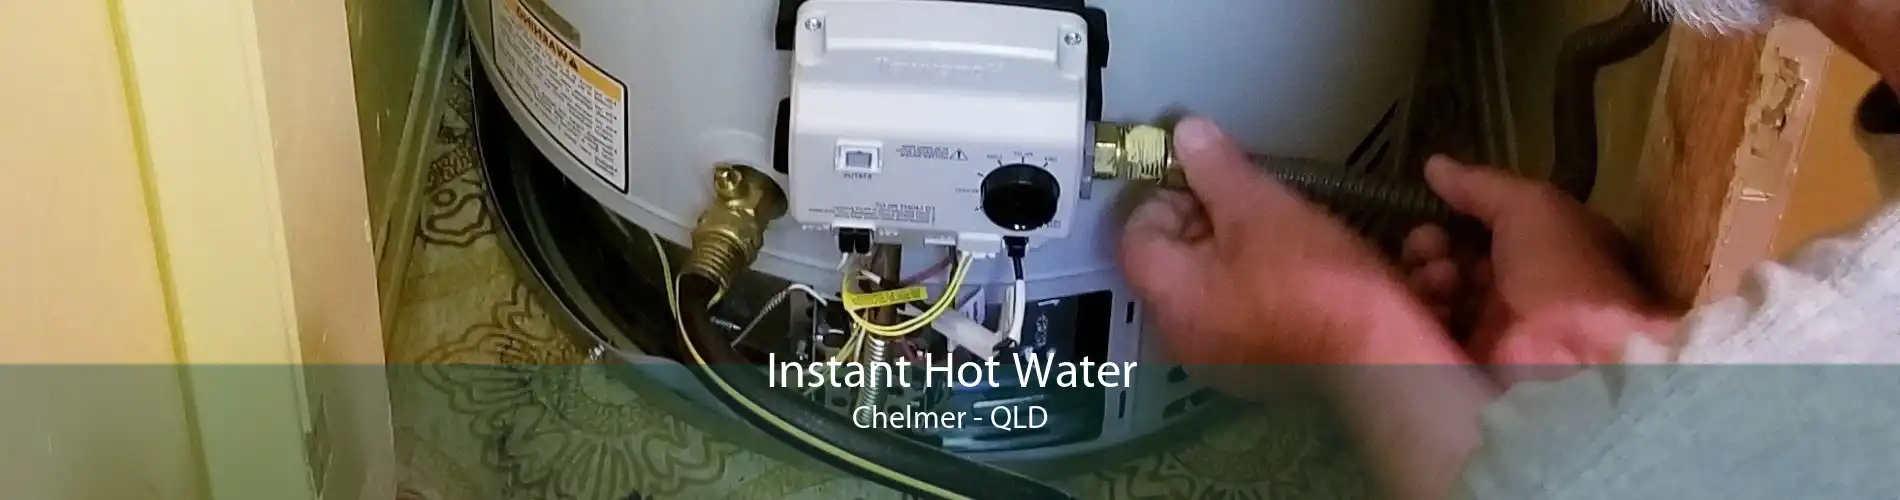 Instant Hot Water Chelmer - QLD